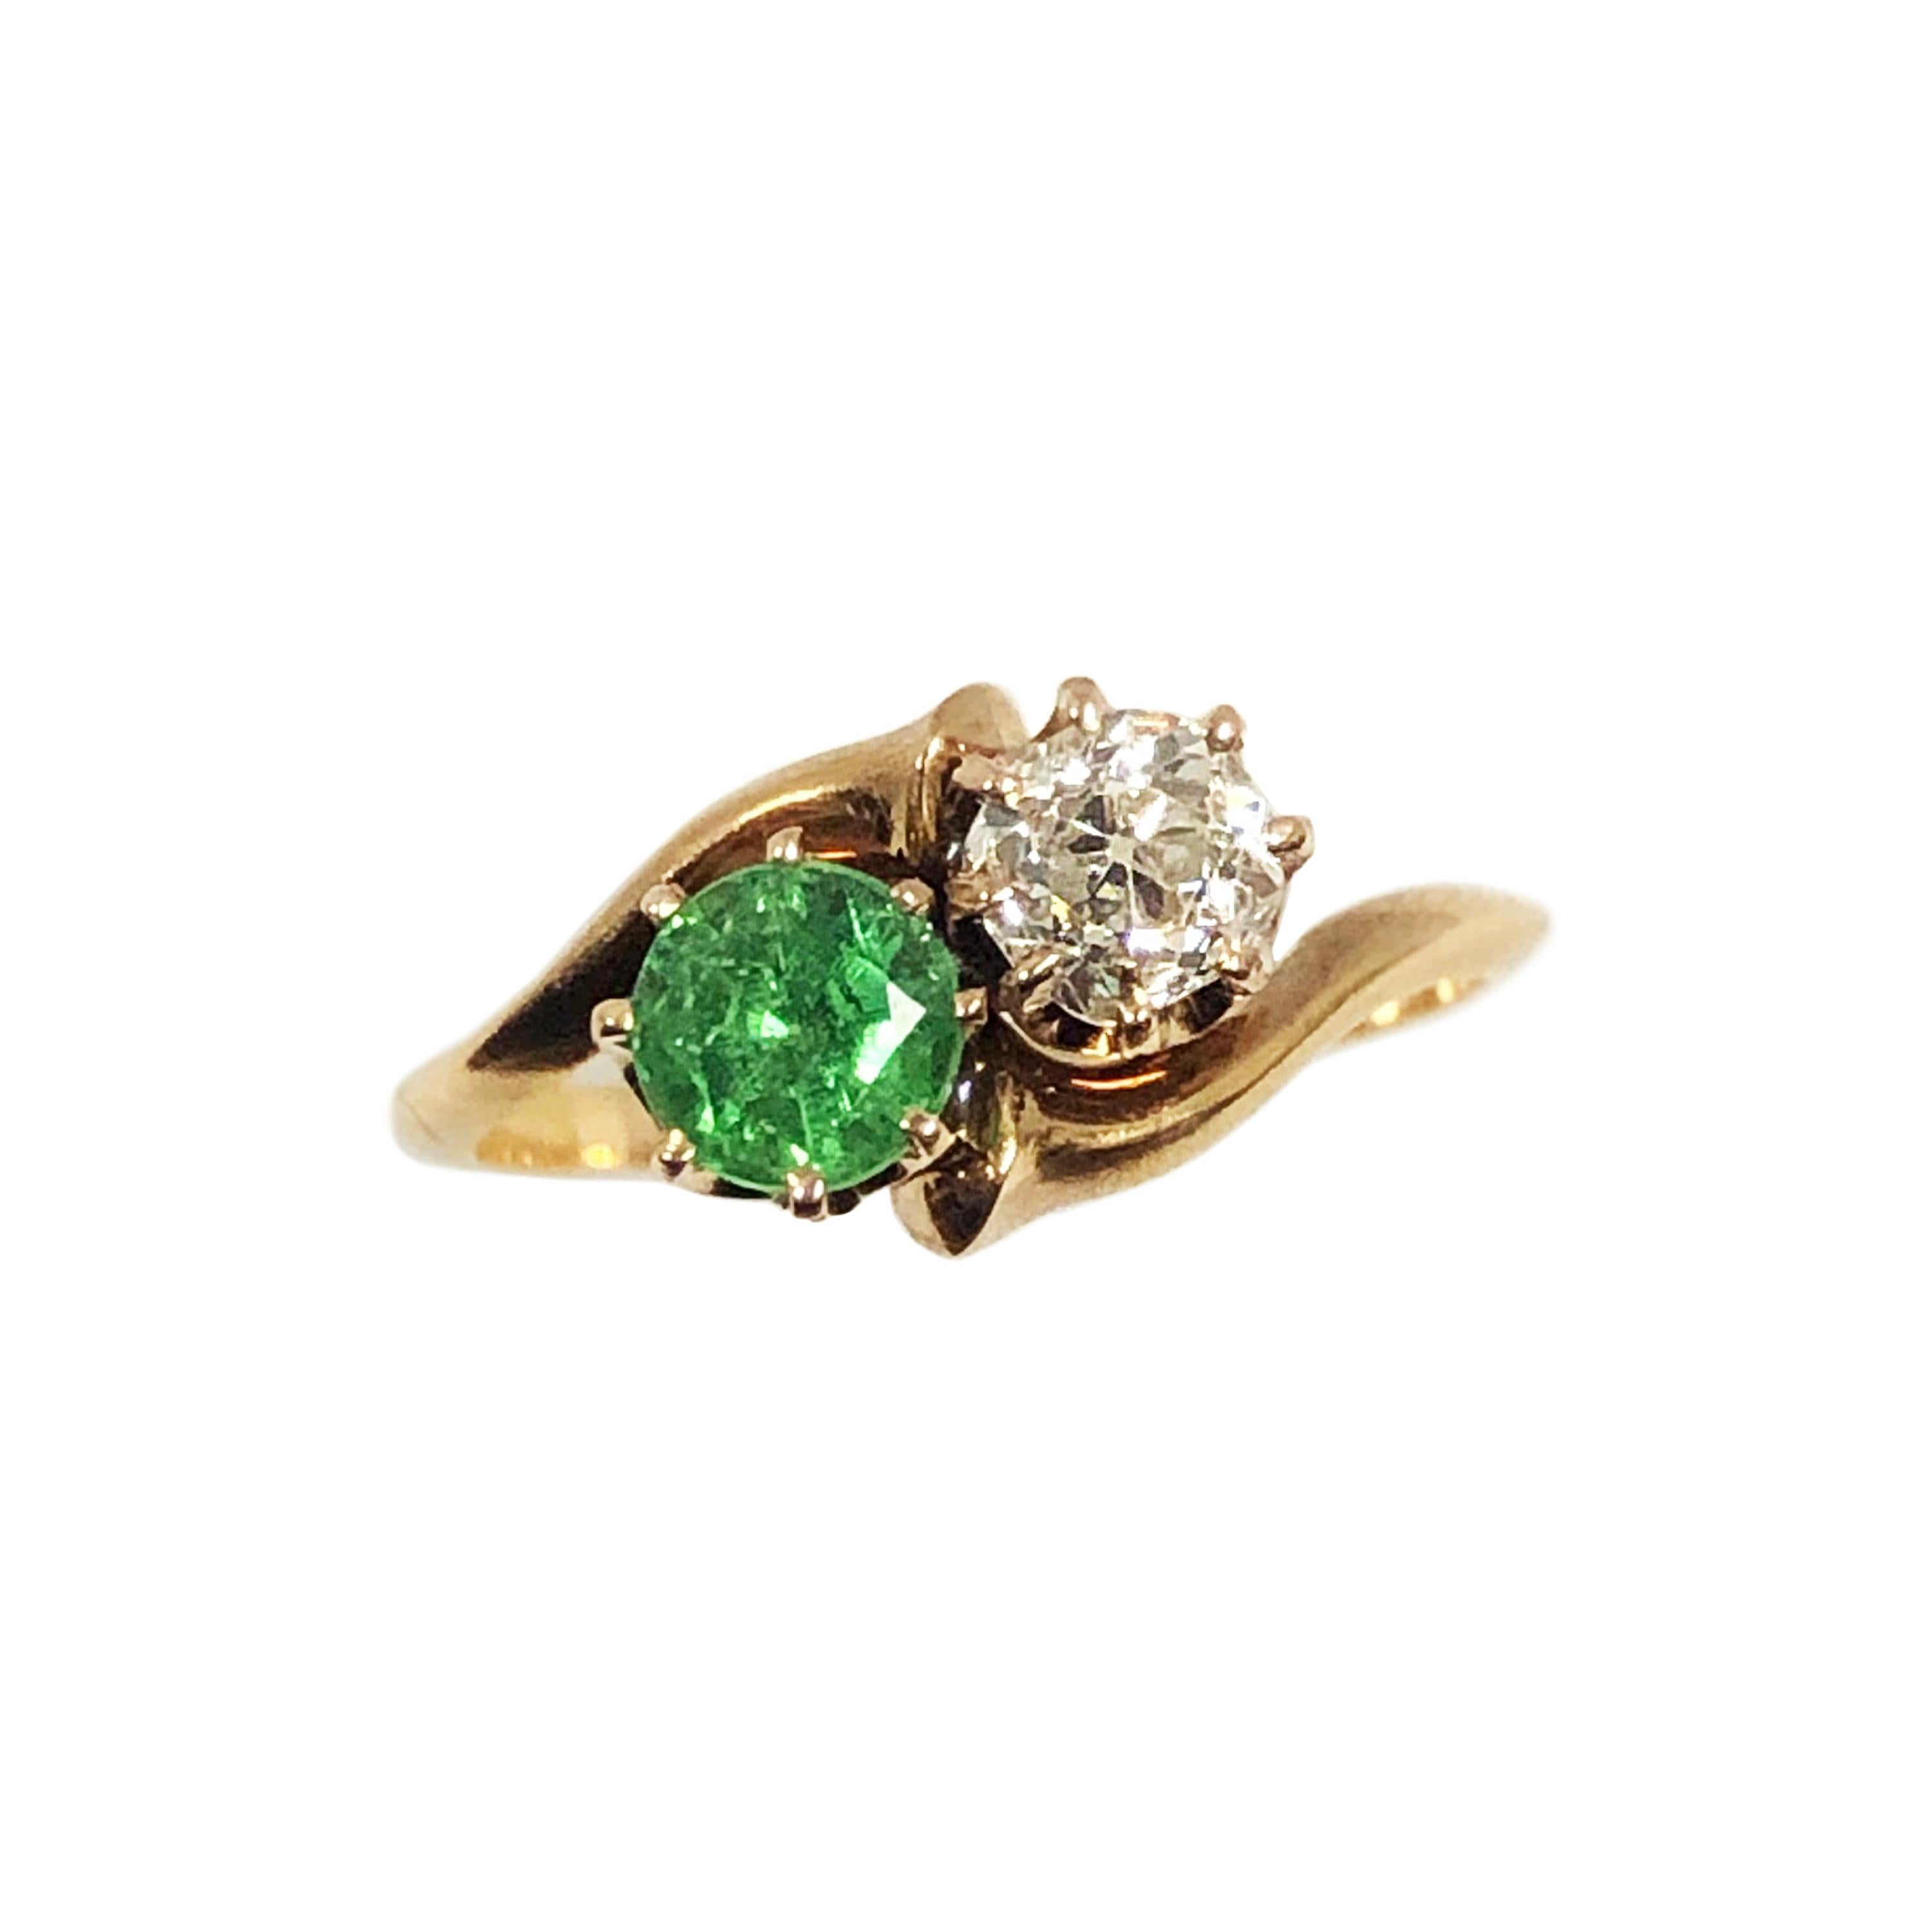 Circa 1900 14k Yellow Gold Btpass Ring set with an old Mine Cut Diamond of approximately .60 Carat and Grading as H in color and VS in Clarity, further set with a Green Demantoid Garnet of a Good intense Color typical of Russian, Ural Mountain mined